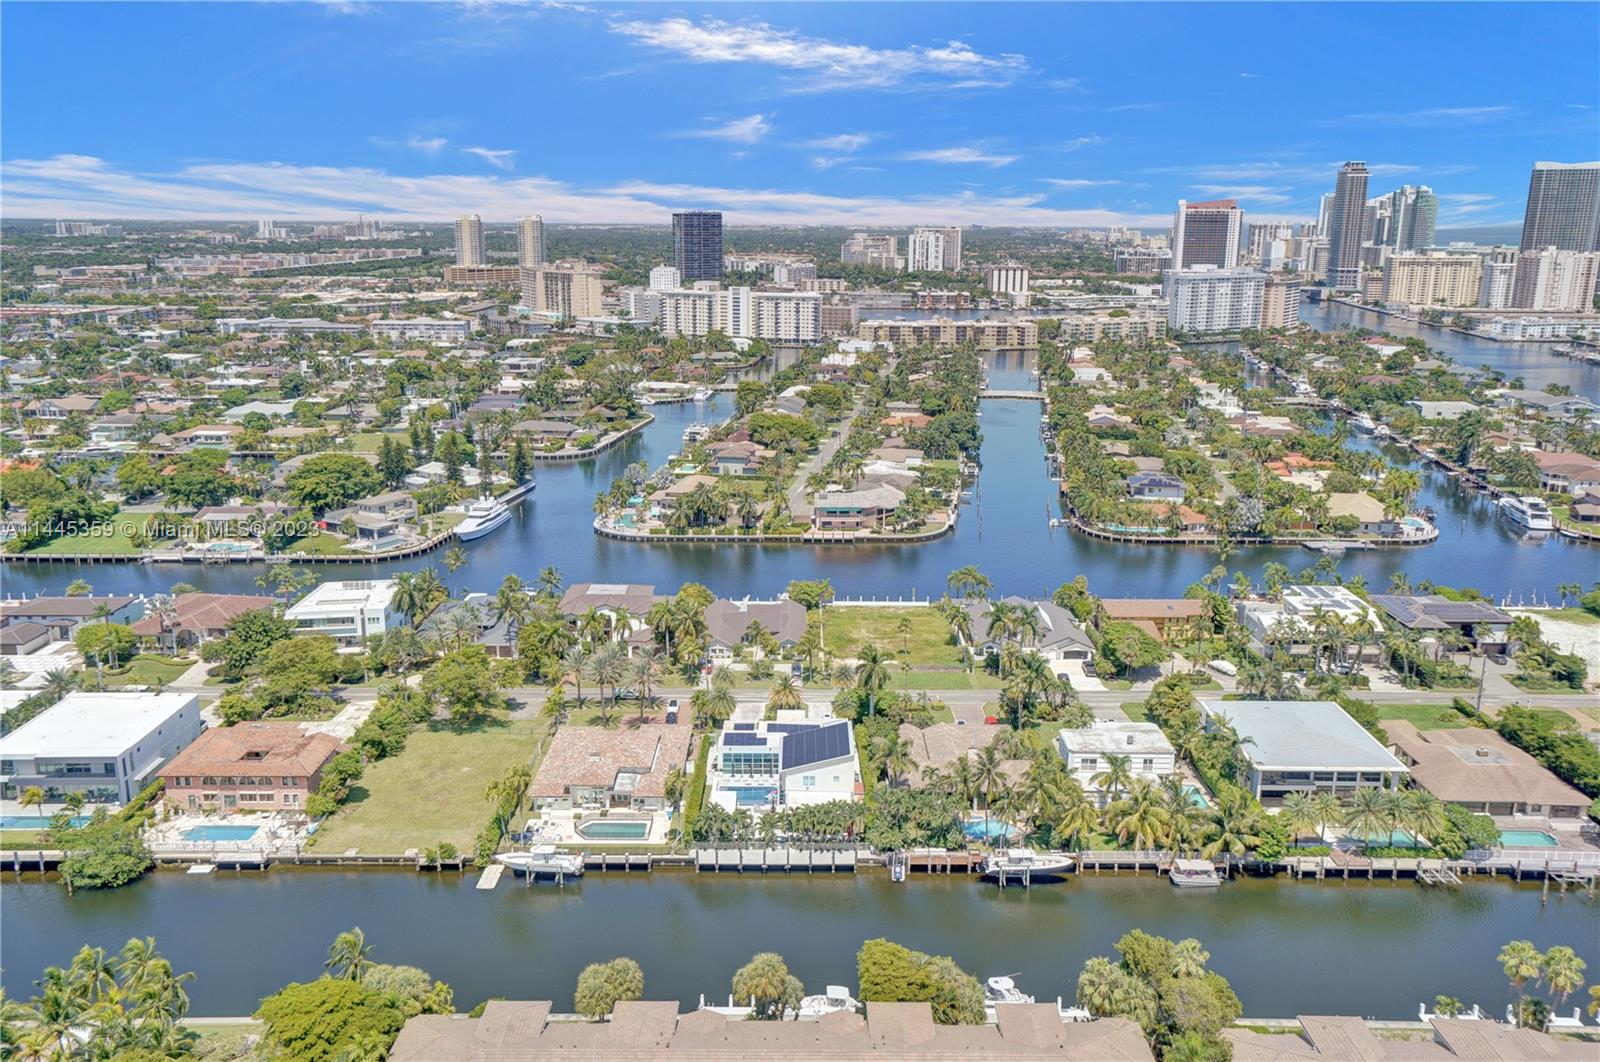 21205 Yacht Club Dr Unit 3108, Aventura, Florida, 33180, United States, 3 Bedrooms Bedrooms, ,2 BathroomsBathrooms,Residential,For Sale,21205 Yacht Club Dr Unit 3108,1335261